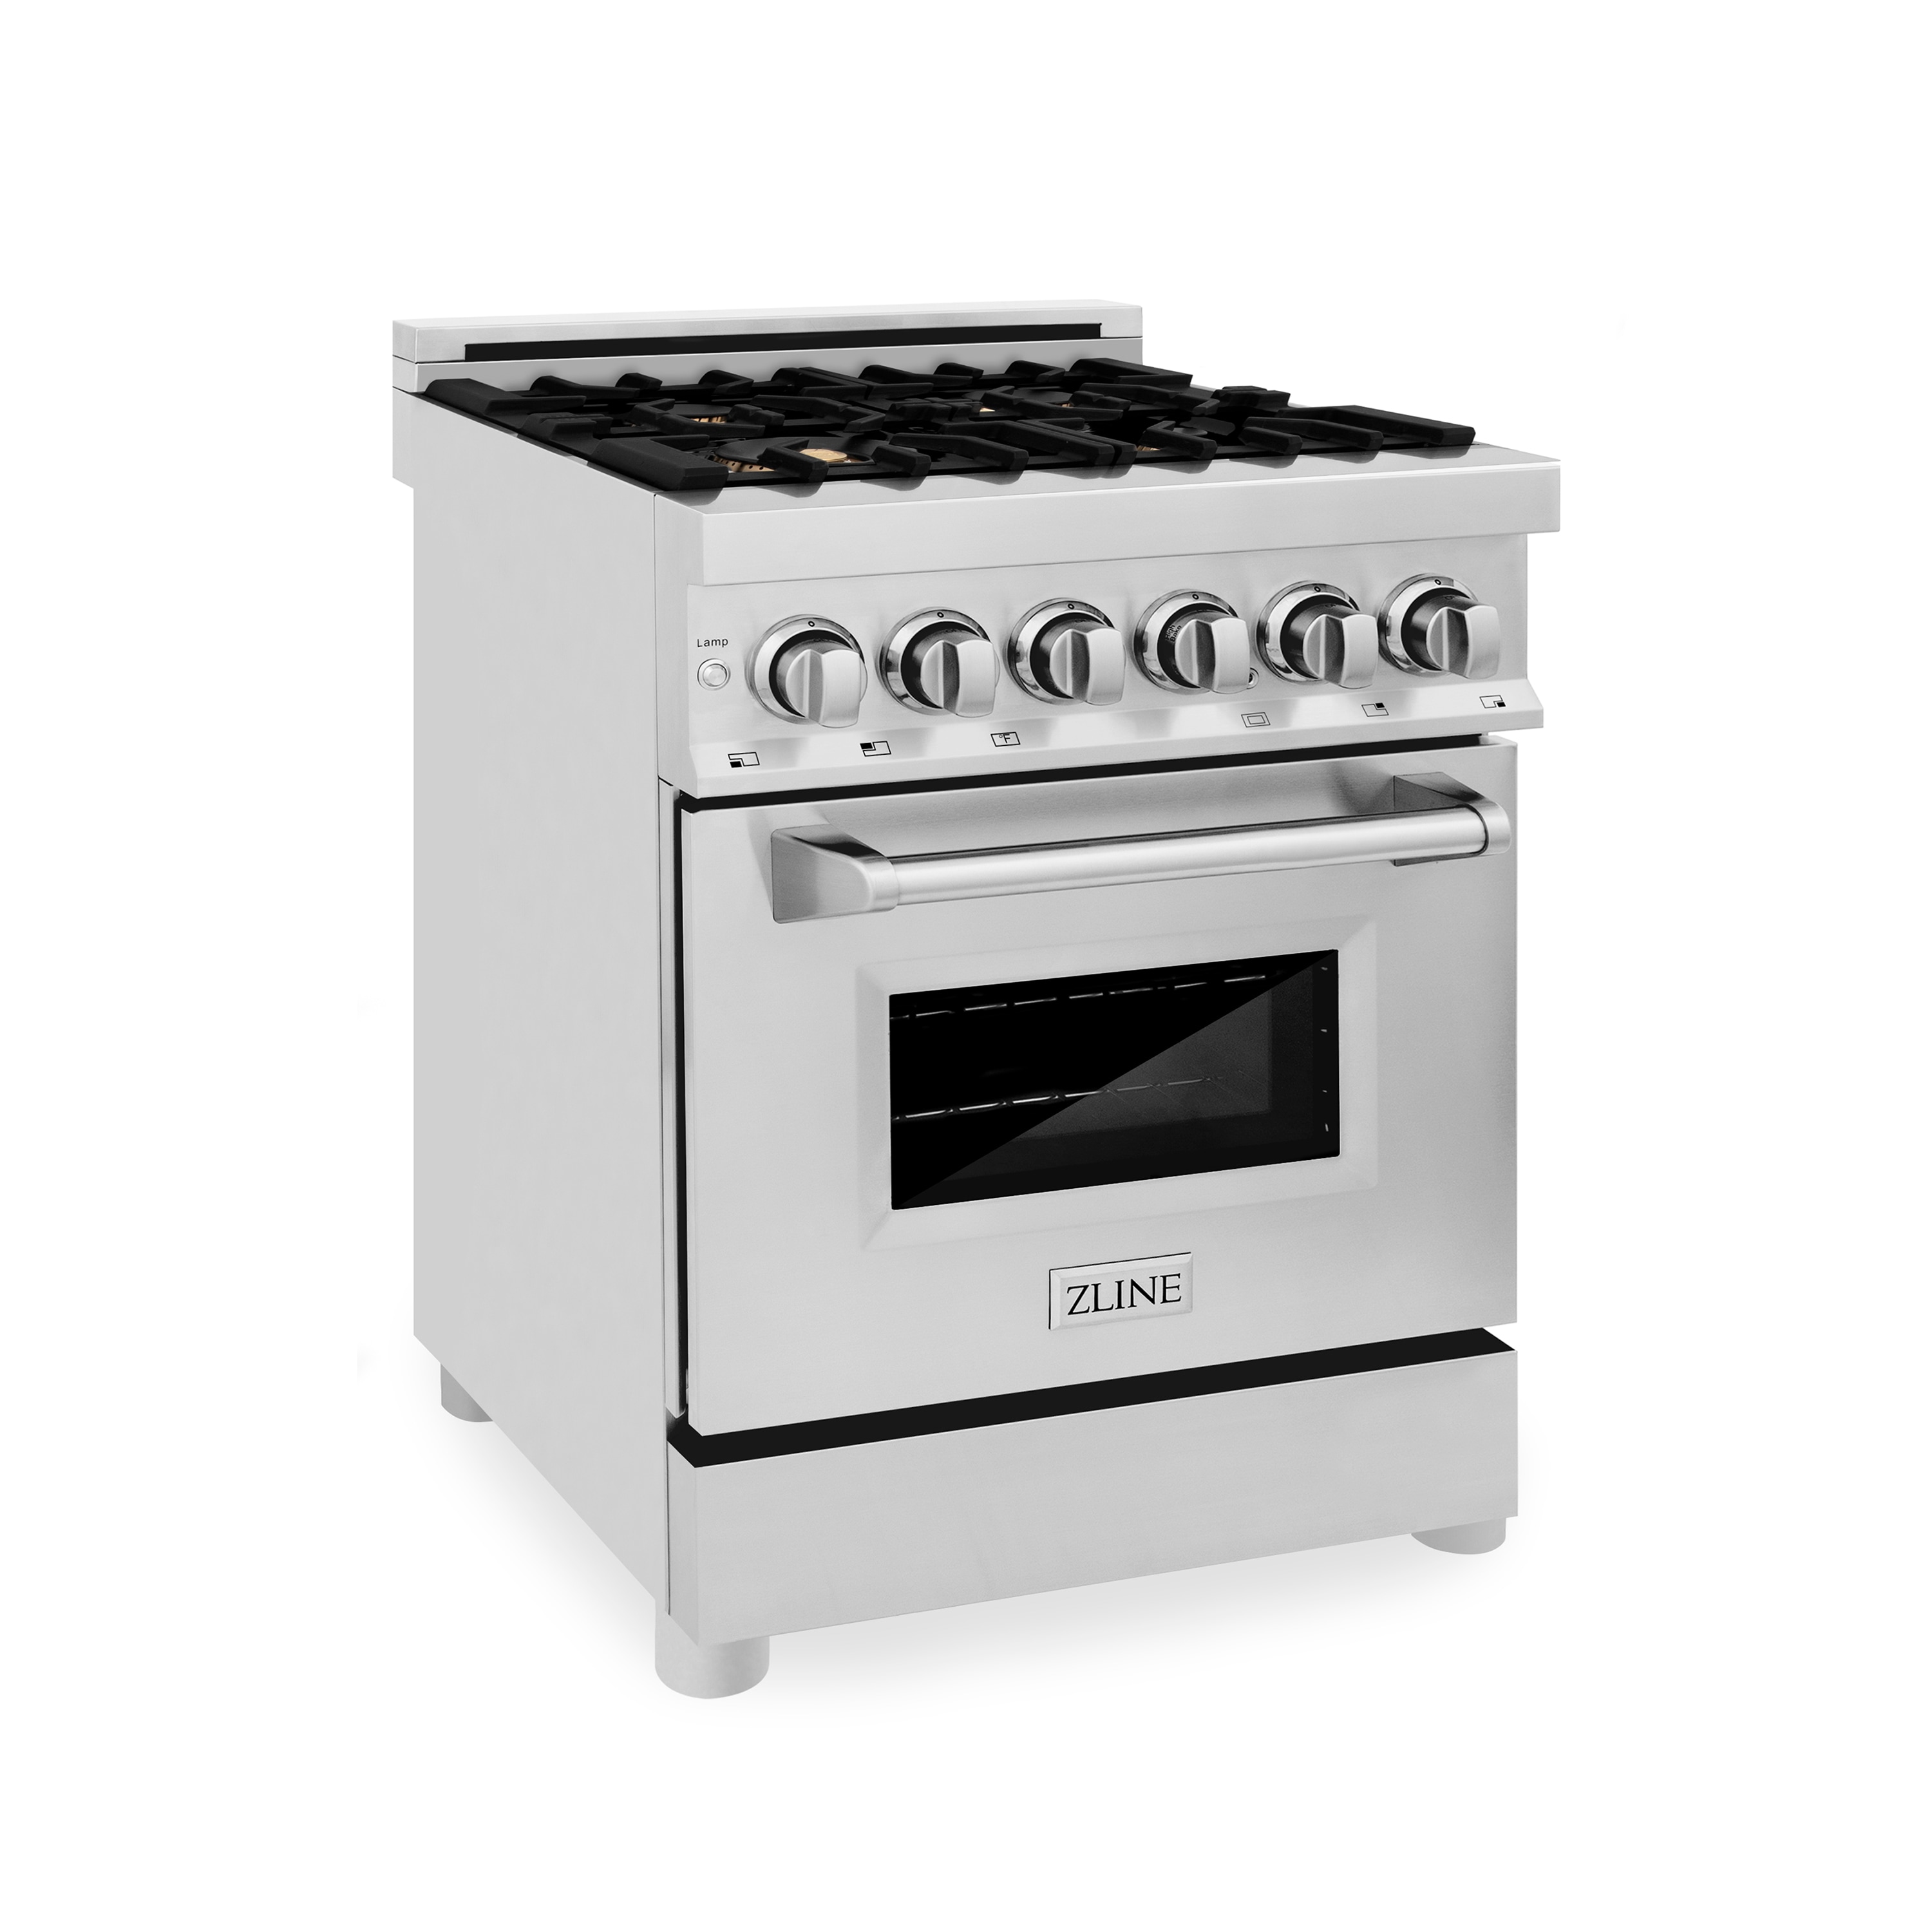 Sleek and Reliable Gas Range for Your Kitchen